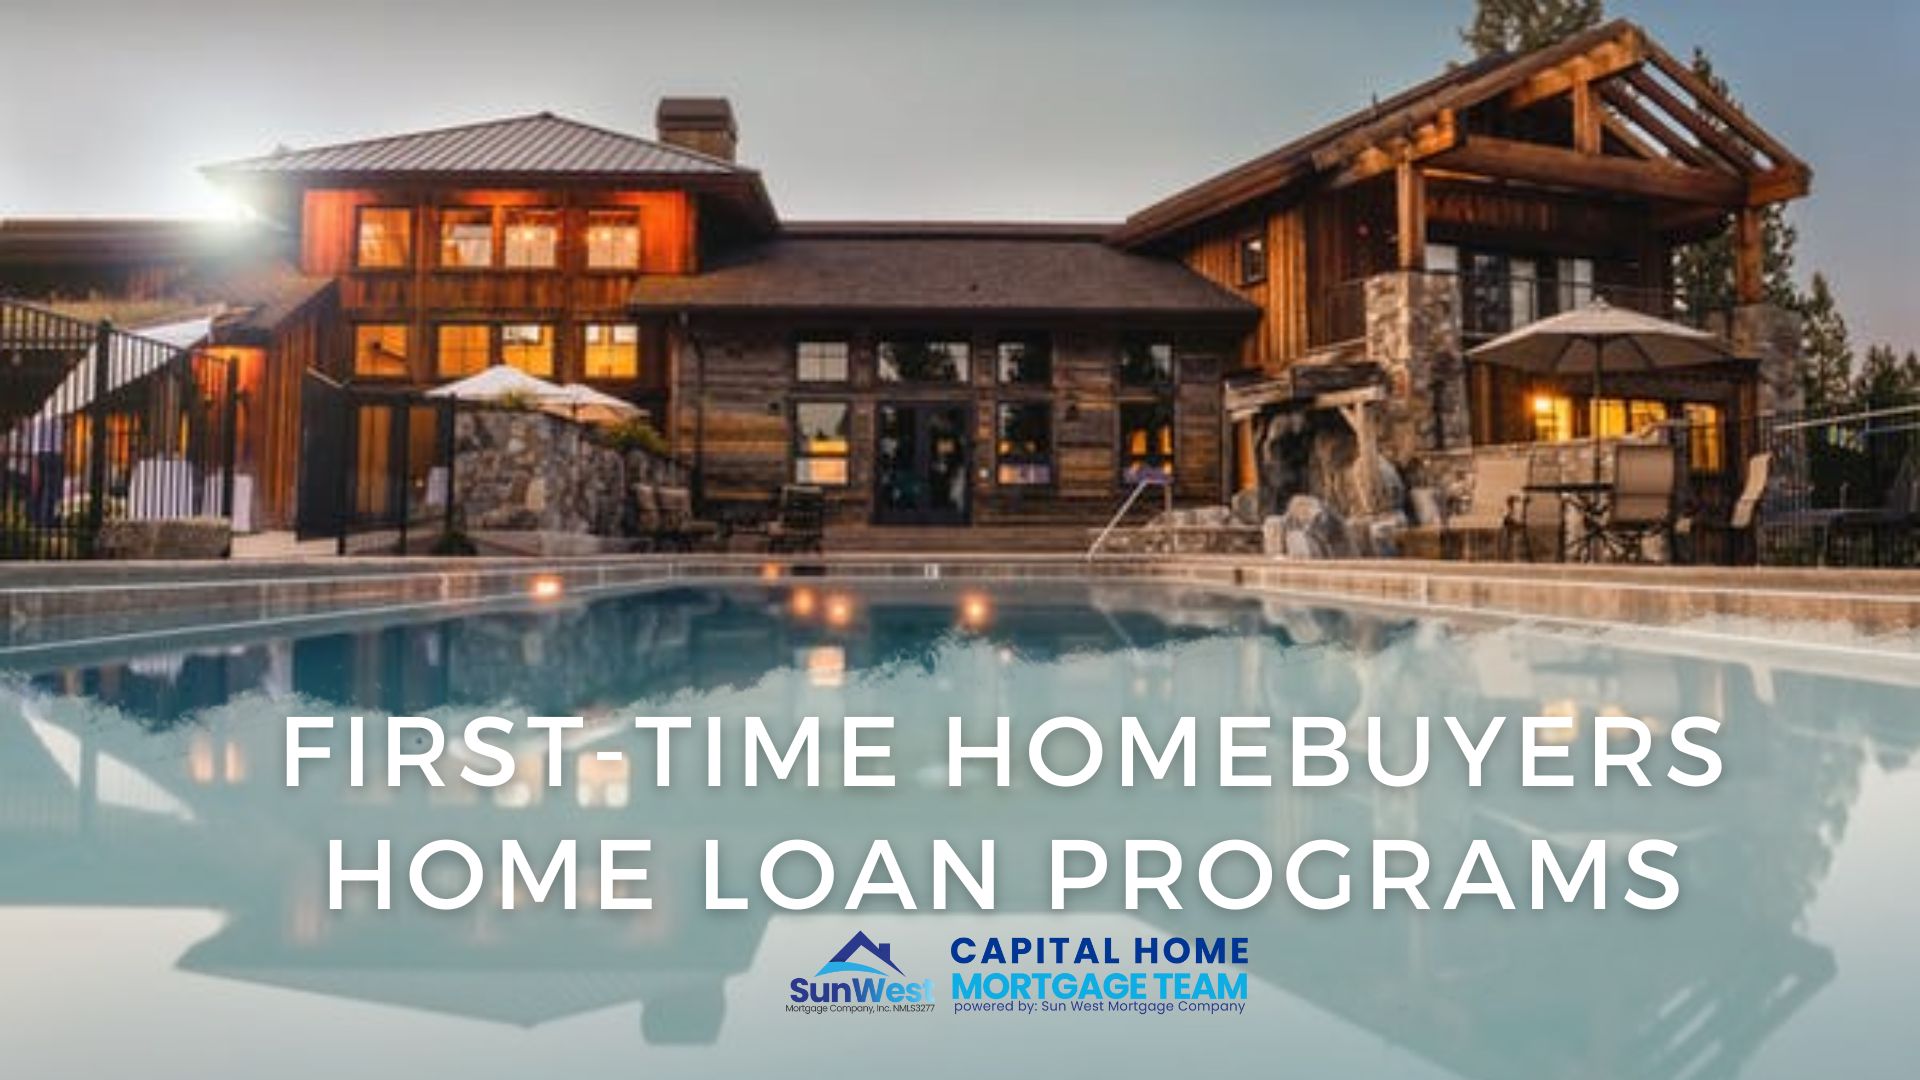 First-Time Homebuyers Home Loan Programs